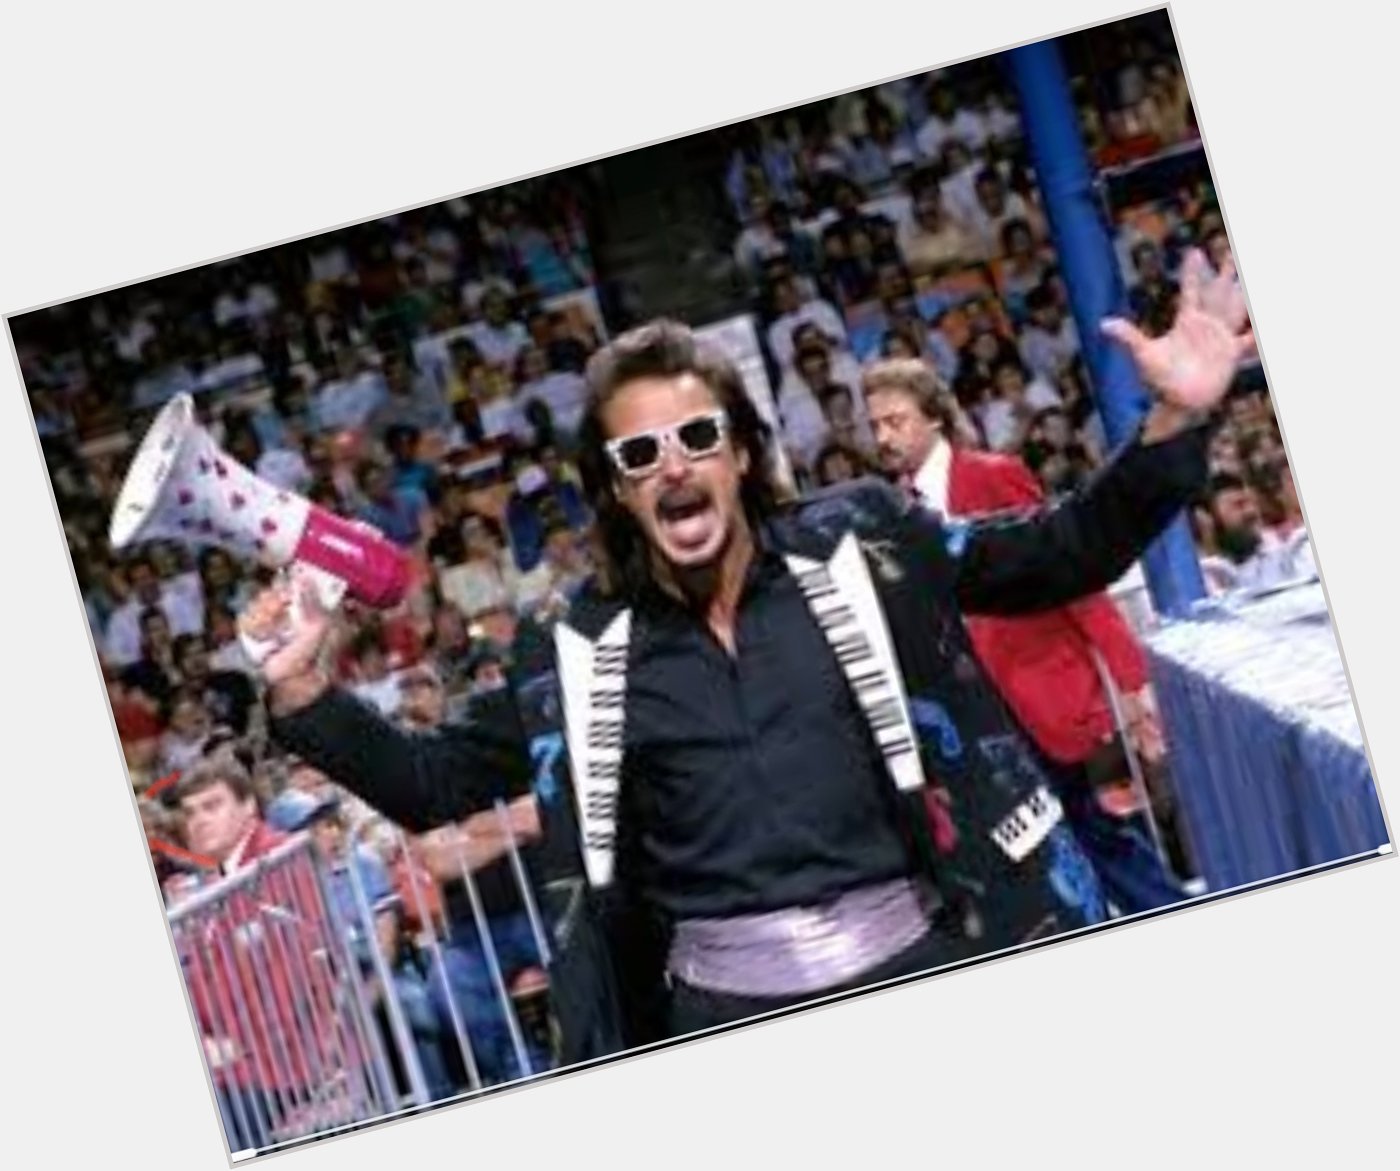 Happy birthday and happy new year to the Mouth of the South Jimmy Hart! 